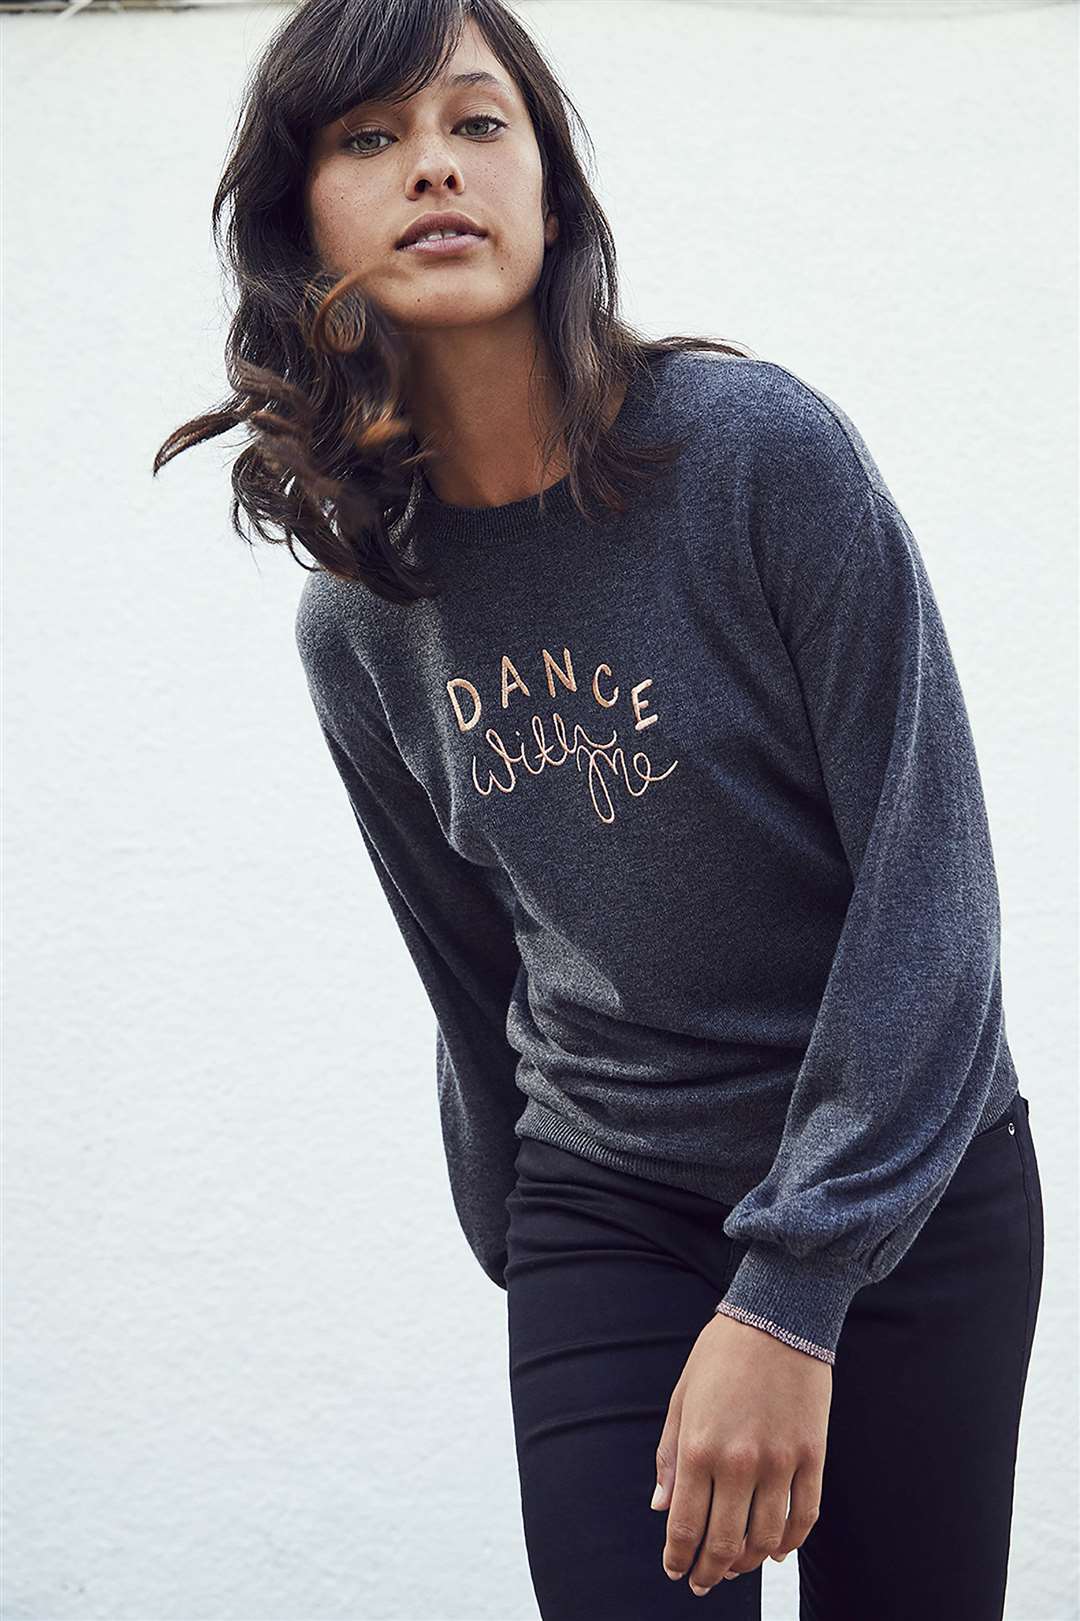 Dance With Me Jumper, £49.50, available from Oliver Bonas